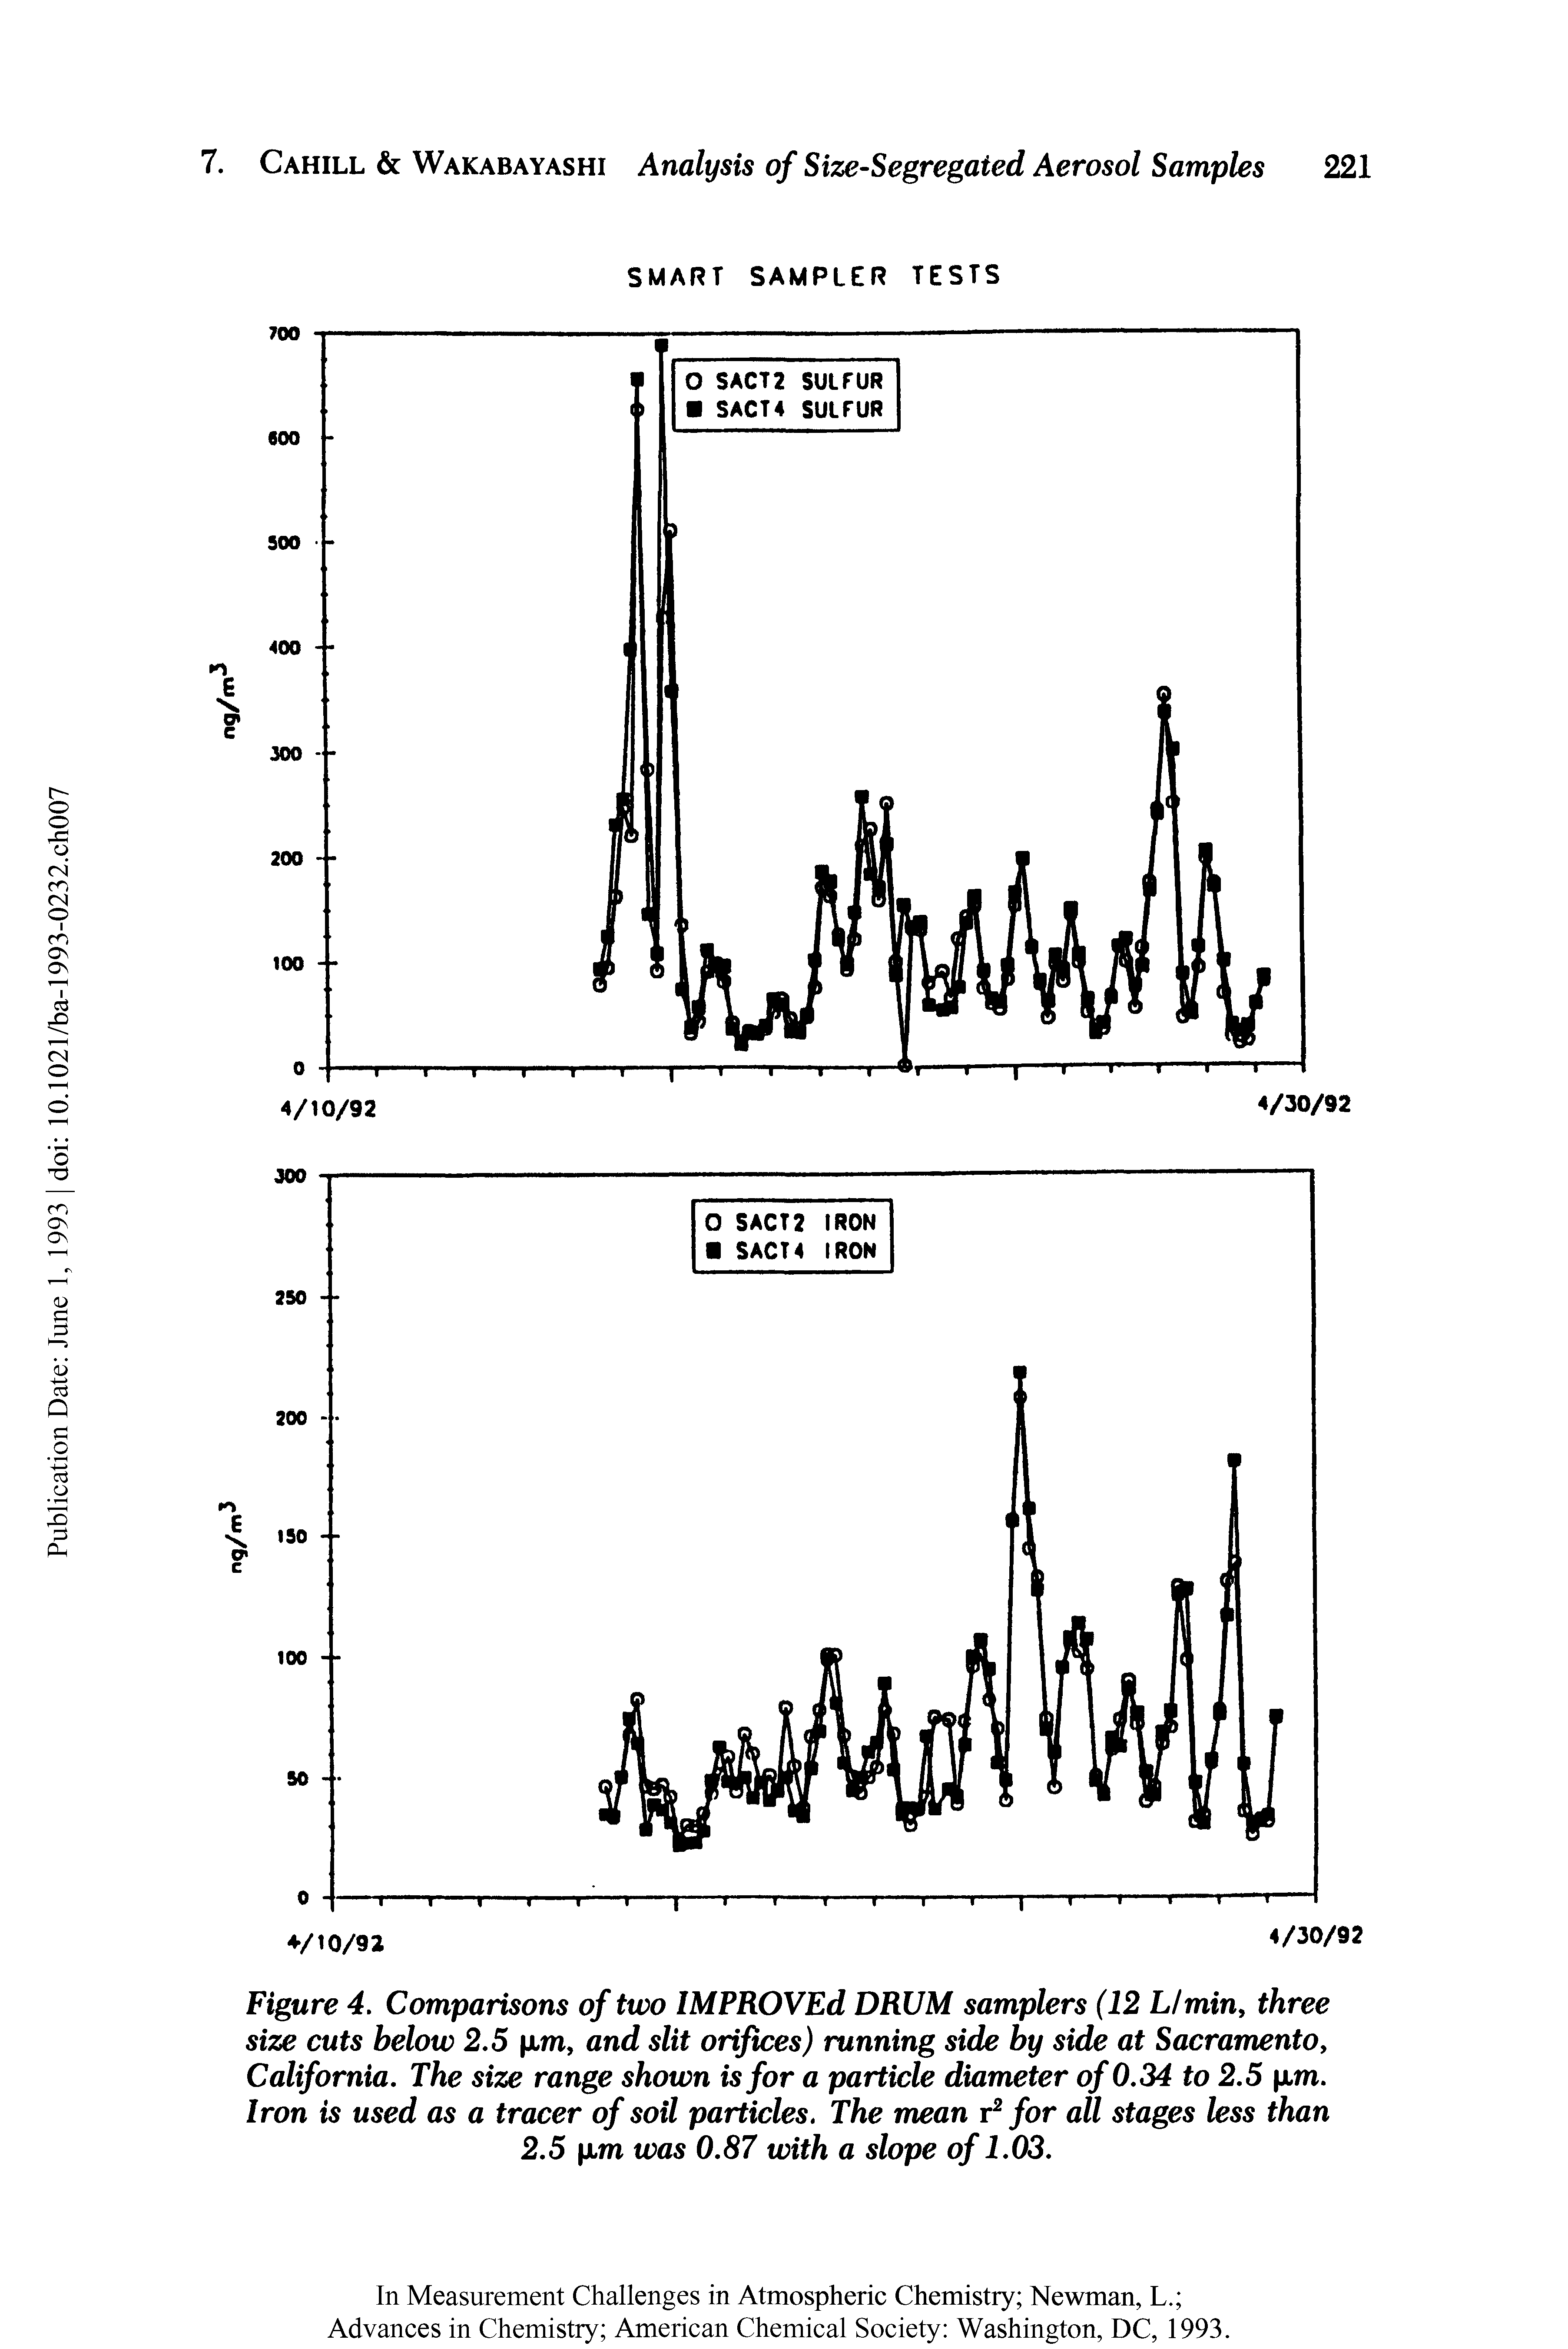 Figure 4. Comparisons of two IMPROVEd DRUM samplers (12 LI min, three size cuts below 2.5 xm, and slit orifices) running side by side at Sacramento, California. The size range shown is for a particle diameter of 0.34 to 2.5 xm. Iron is used as a tracer of soil particles. The mean r2 for all stages less than 2.5 xm was 0.87 with a slope of 1.03.